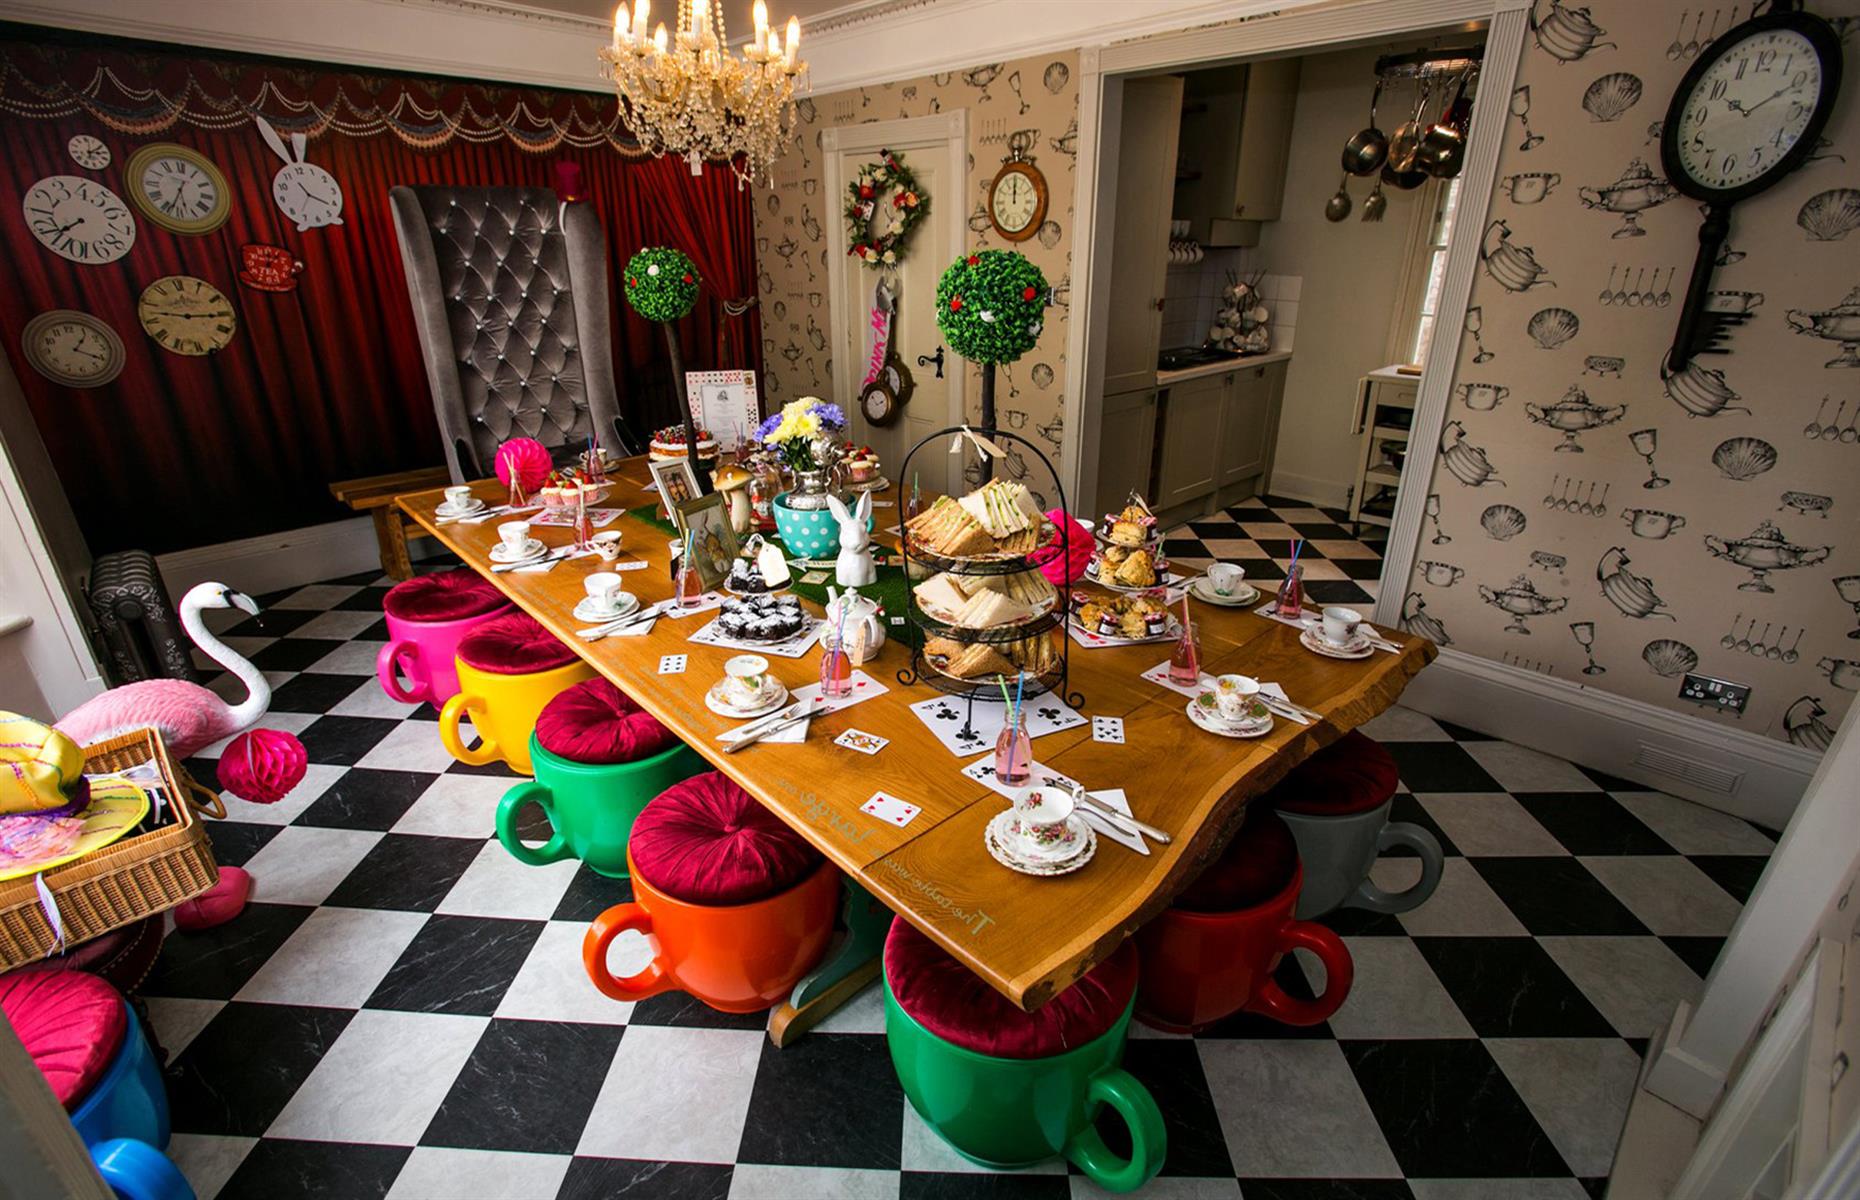 <p>Fall down the rabbit hole where an afternoon tea with The Mad Hatter awaits at this <em>Alice in Wonderland</em>-themed hotel. The <a href="https://www.wonderlandhouse.co.uk/house/">Wonderland House</a> in Brighton, England is all about the Lewis Carroll novel and features rooms dedicated to The Queen of Hearts, the infamous flamingos and Alice herself. </p>